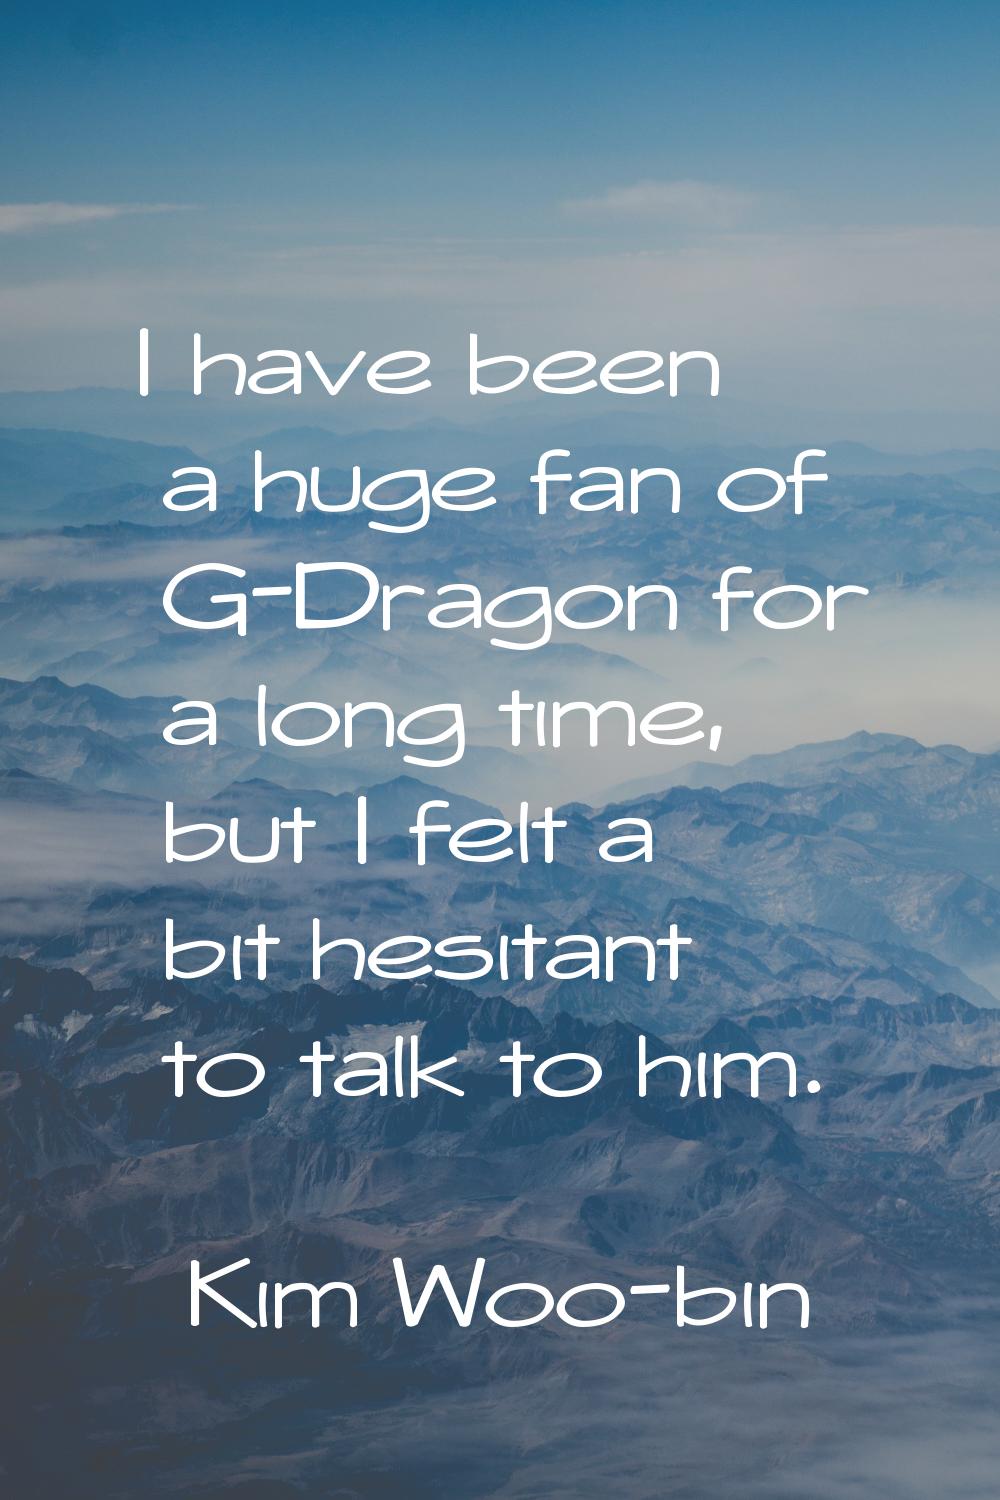 I have been a huge fan of G-Dragon for a long time, but I felt a bit hesitant to talk to him.